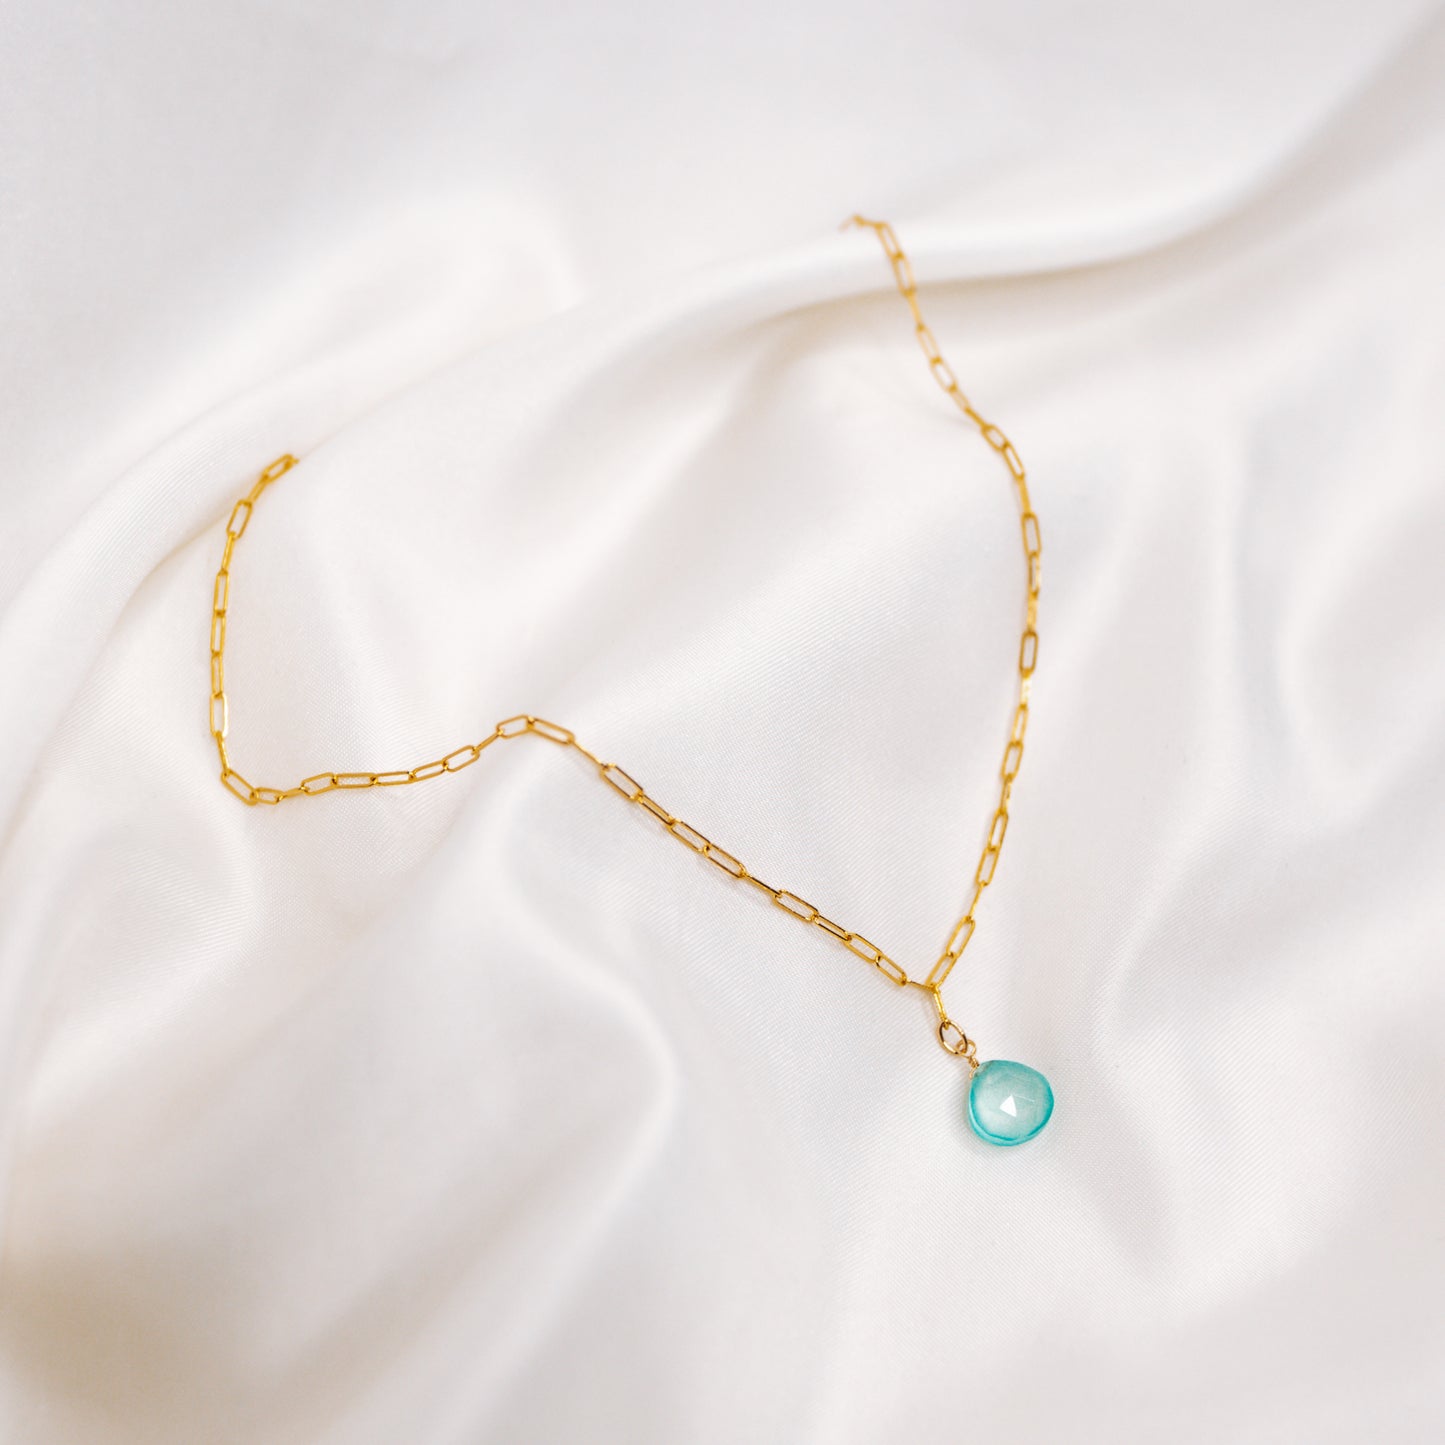 Aqua Blue Chalcedony Gold Filled Link Chain Necklace